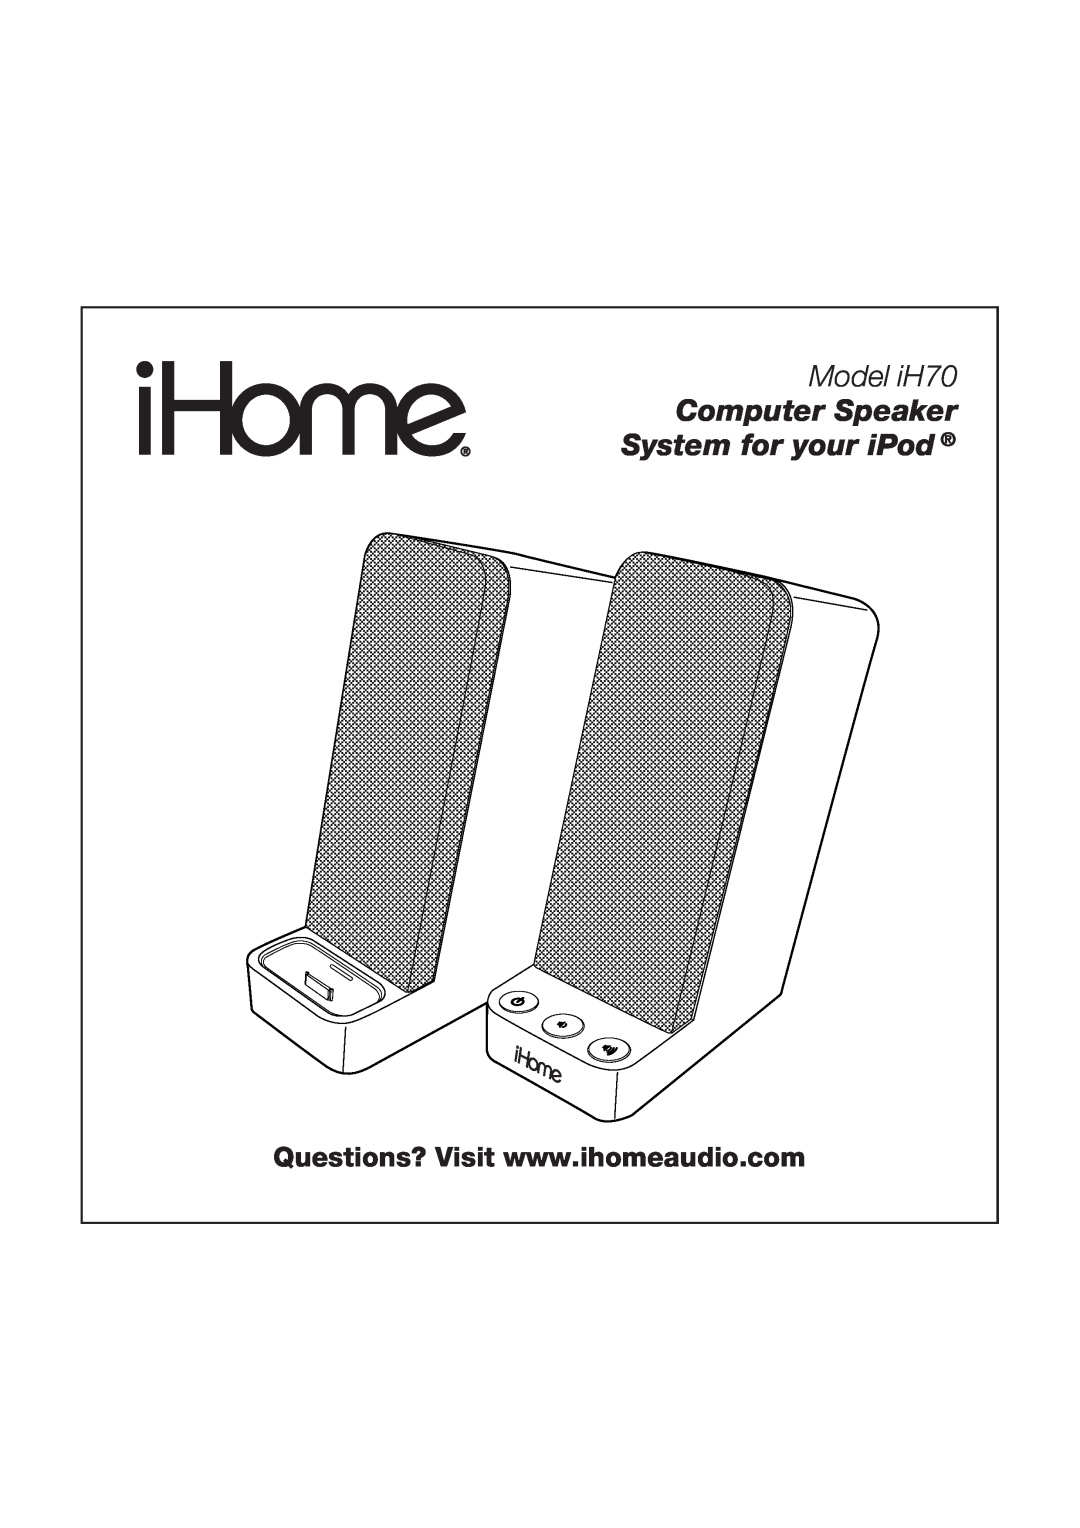 iHome manual Model iH70, Computer Speaker System for your iPod 